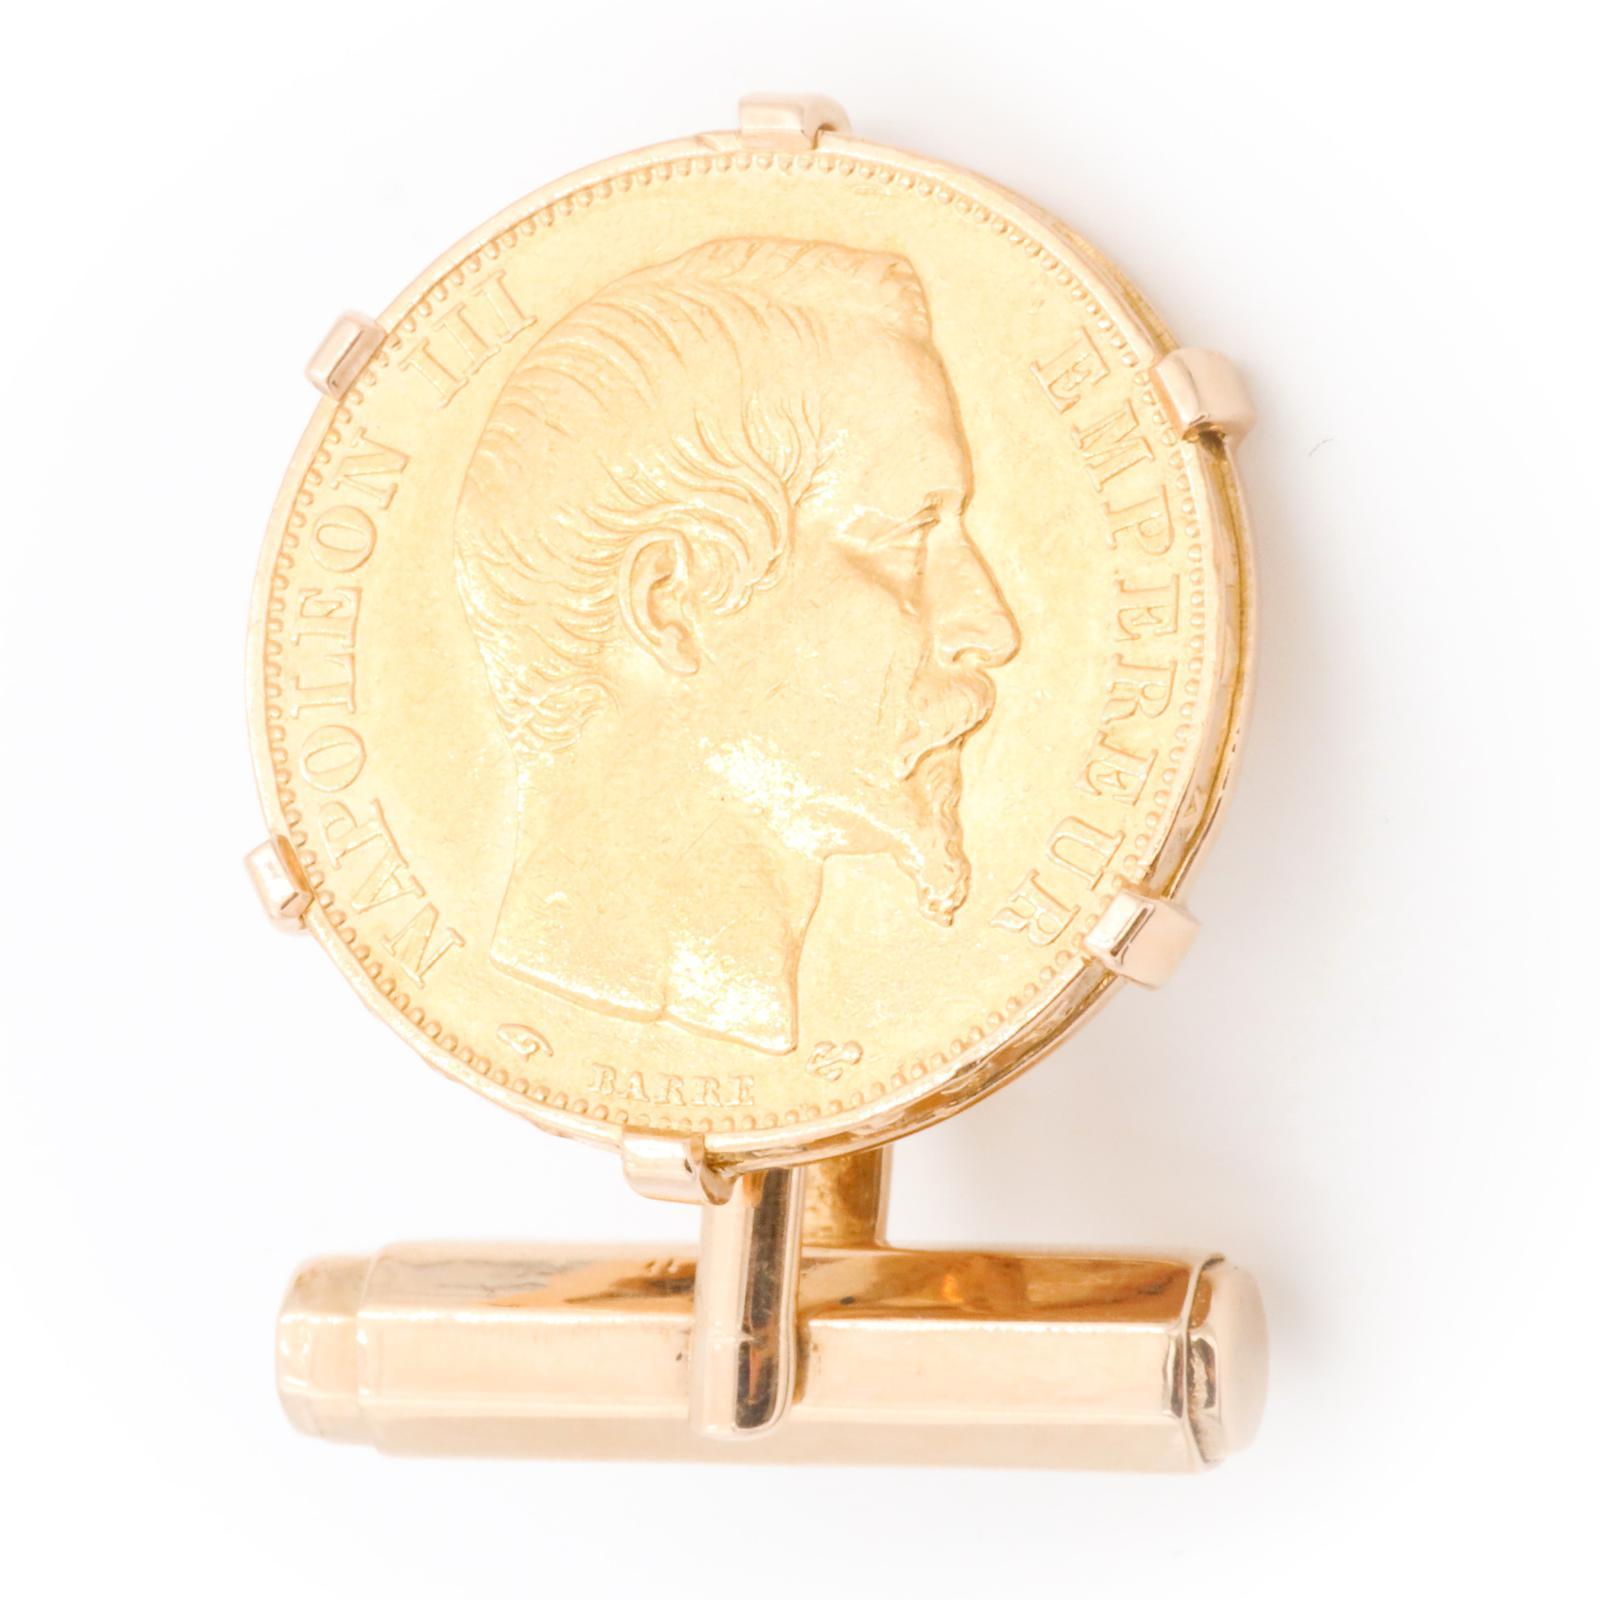 Cufflinks in yellow gold 750 thousandths (18 carats). composed of two pieces of 20 Francs Napoleon III in gold 900 thousandths. diameter piece: 2.09 cm. weight per piece: 6.45 g. dimensions: 2.77 cm x 2.12 cm total weight: 23.78 g. eagle head